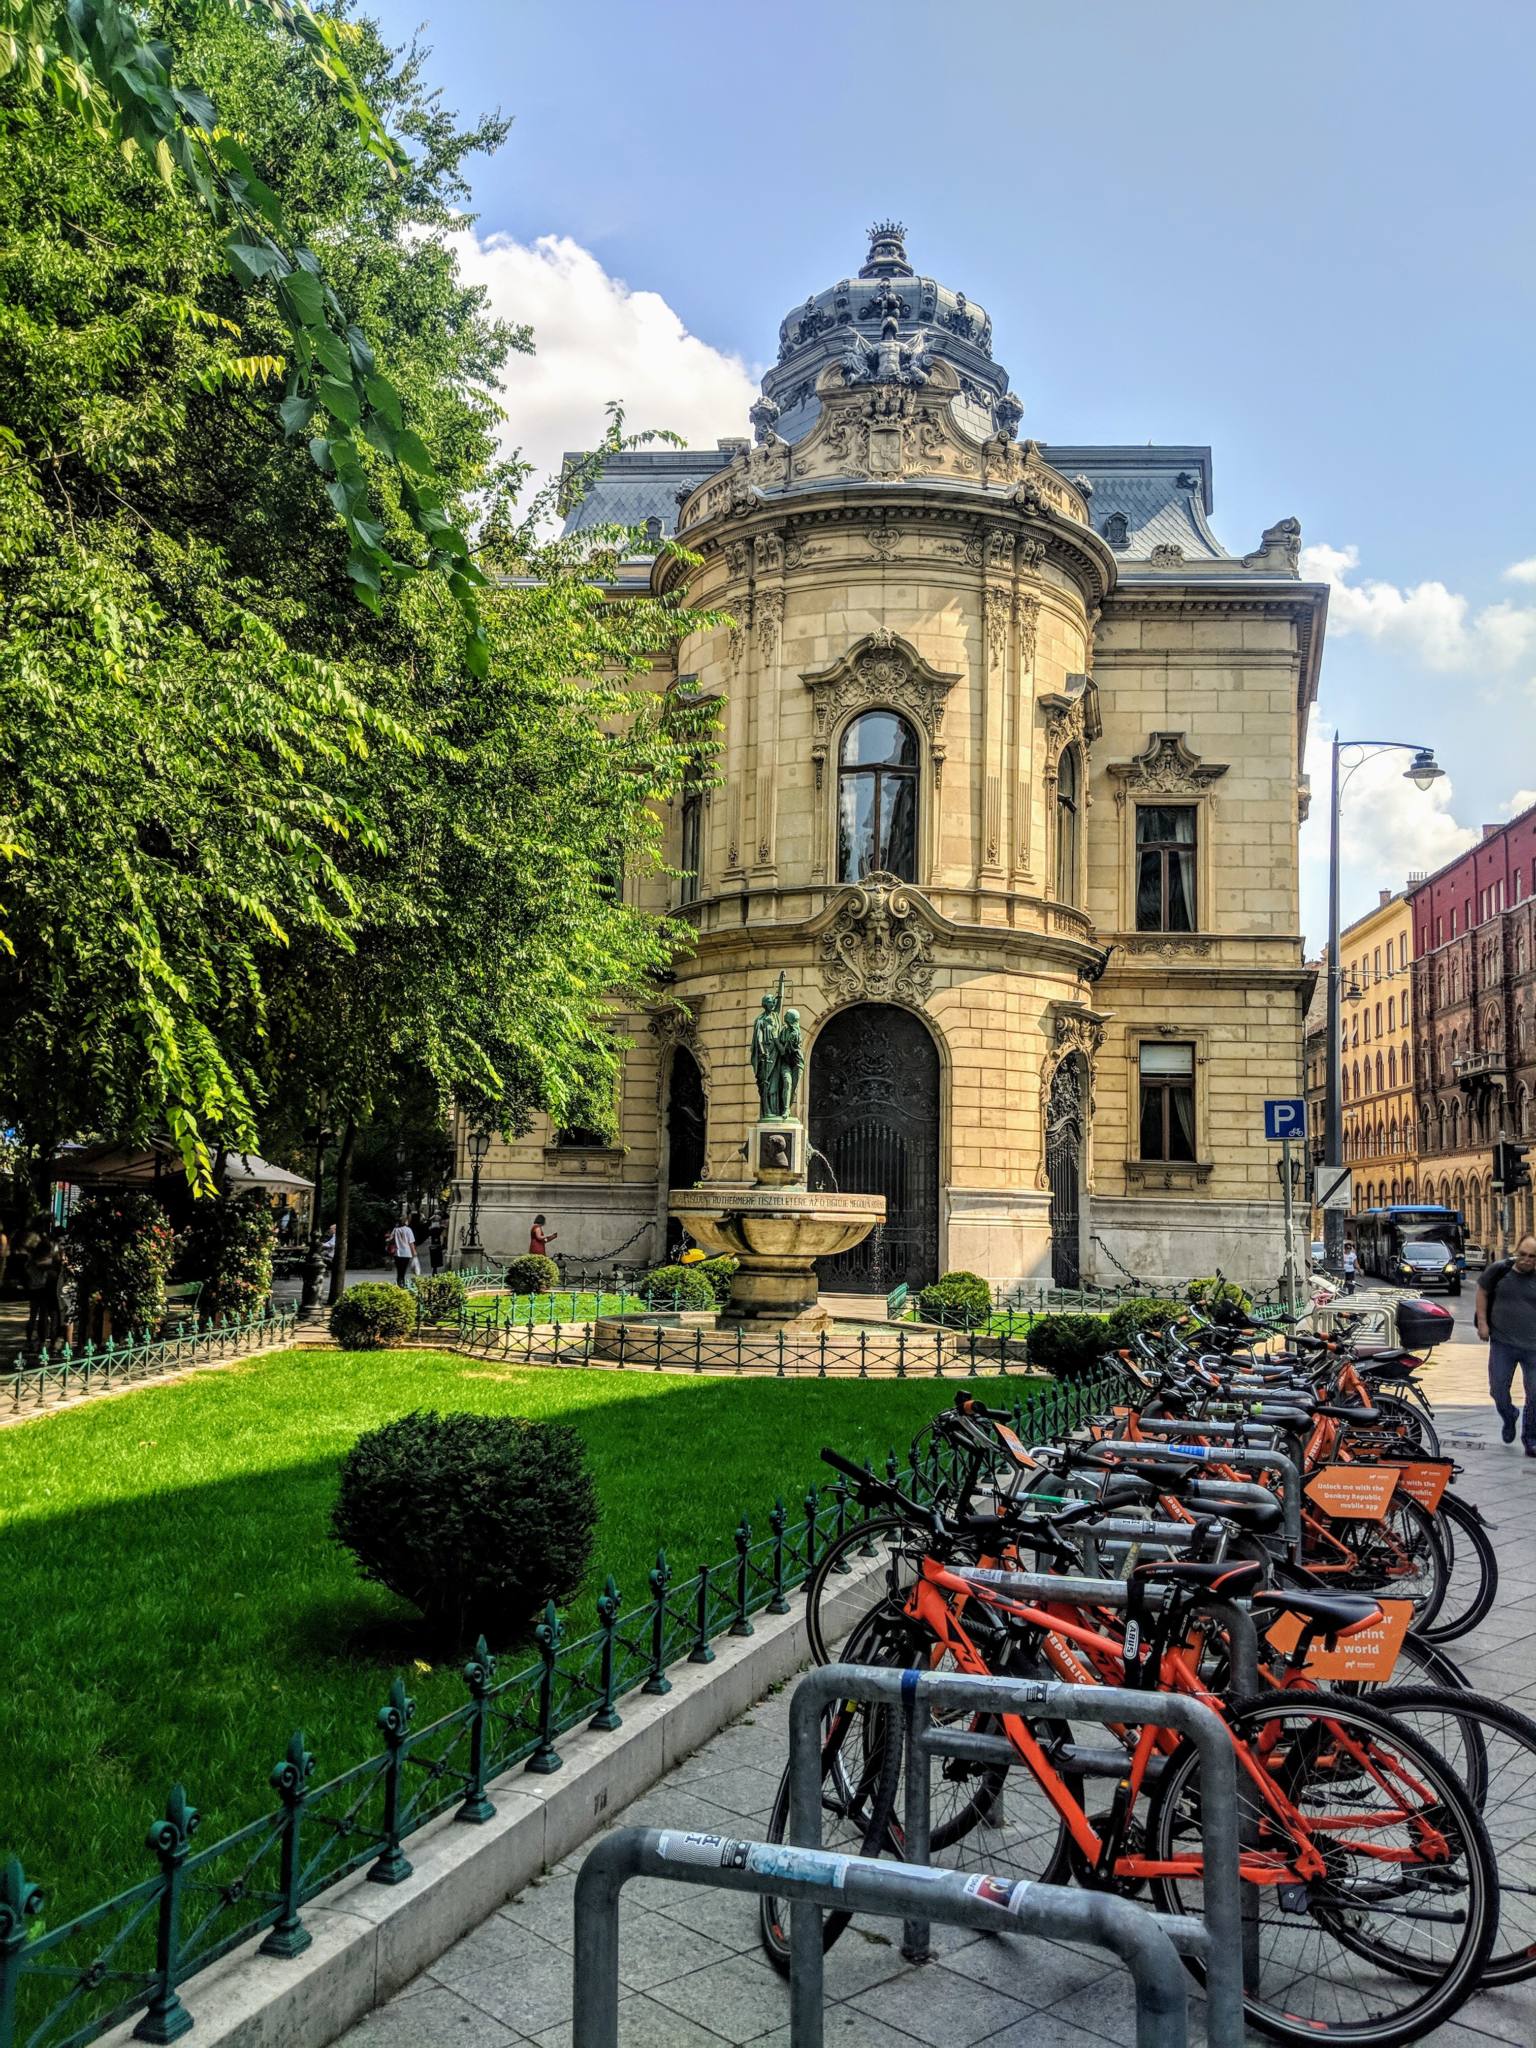 Hidden Gems Tour of Budapest - in the garden of a residential building